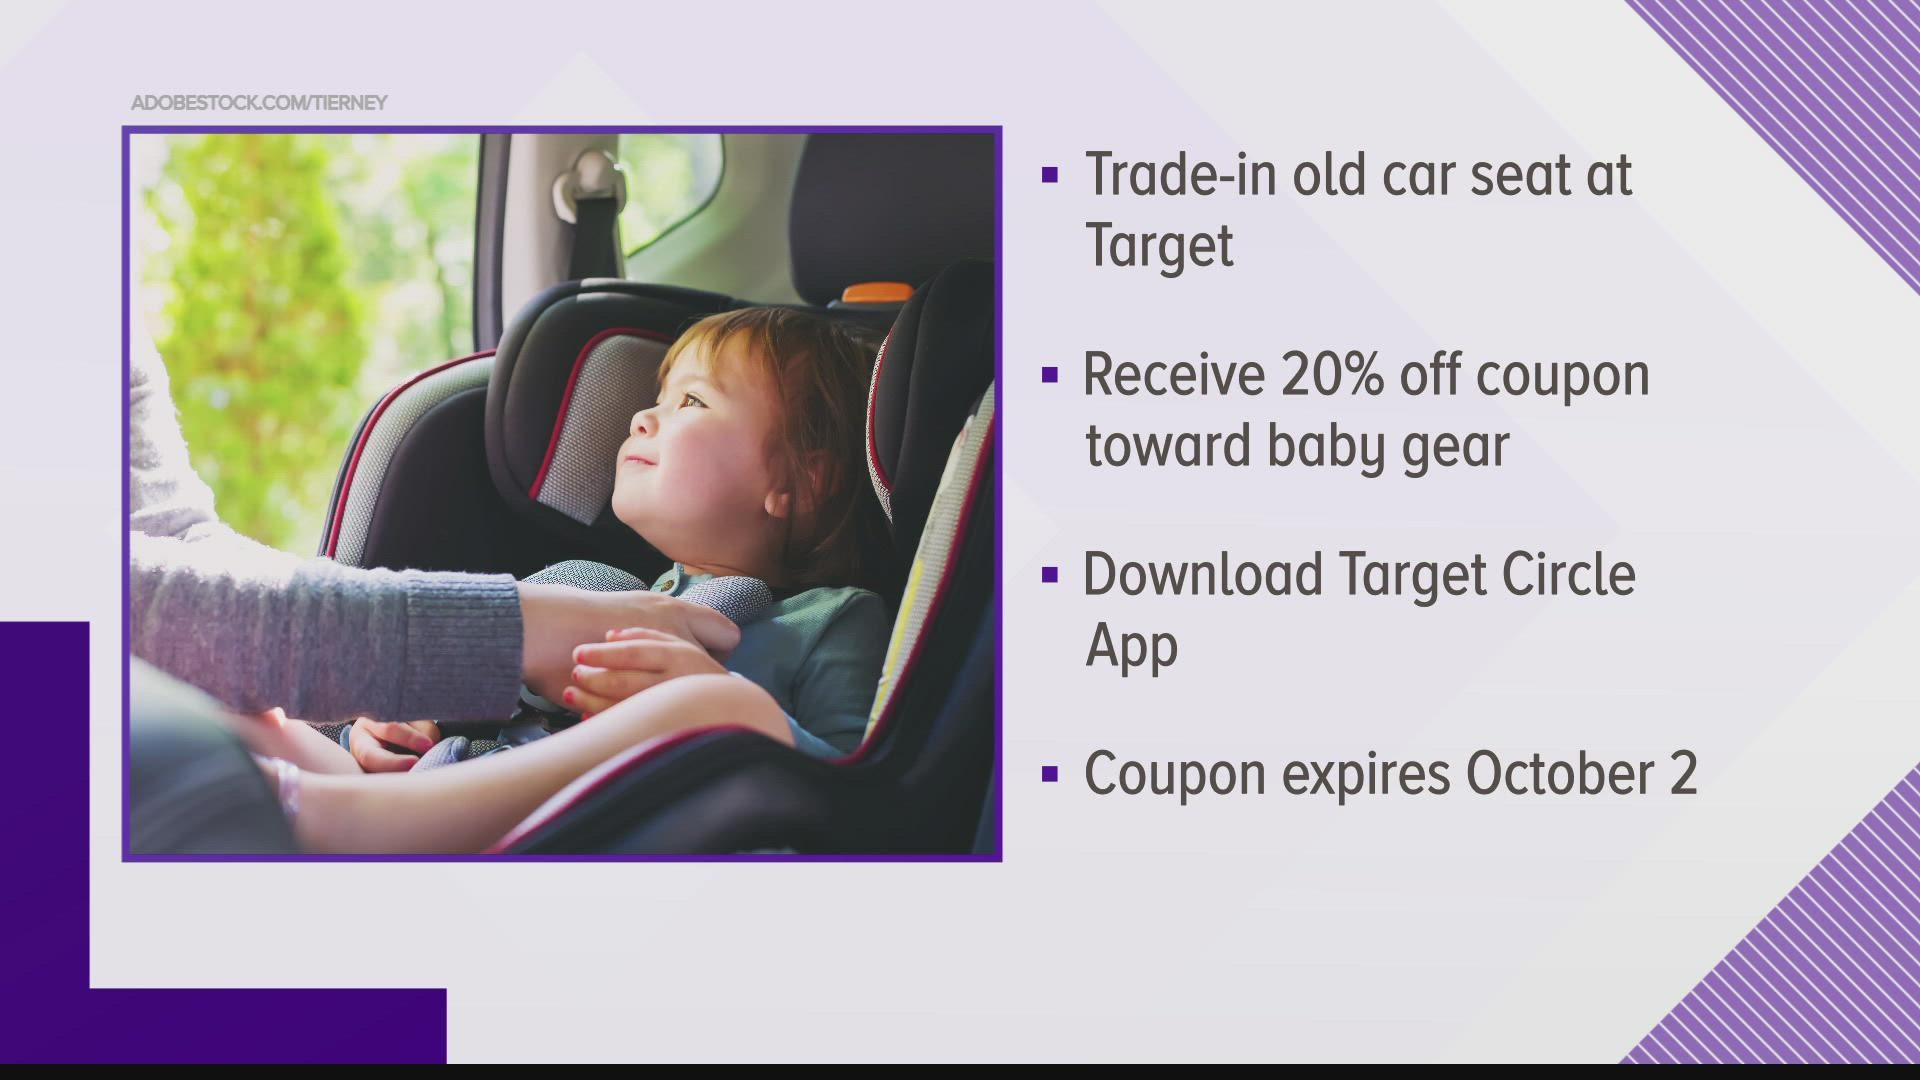 Customers can trade car seats in to Target and receive a 20% coupon toward a new car seat, stroller or baby gear.